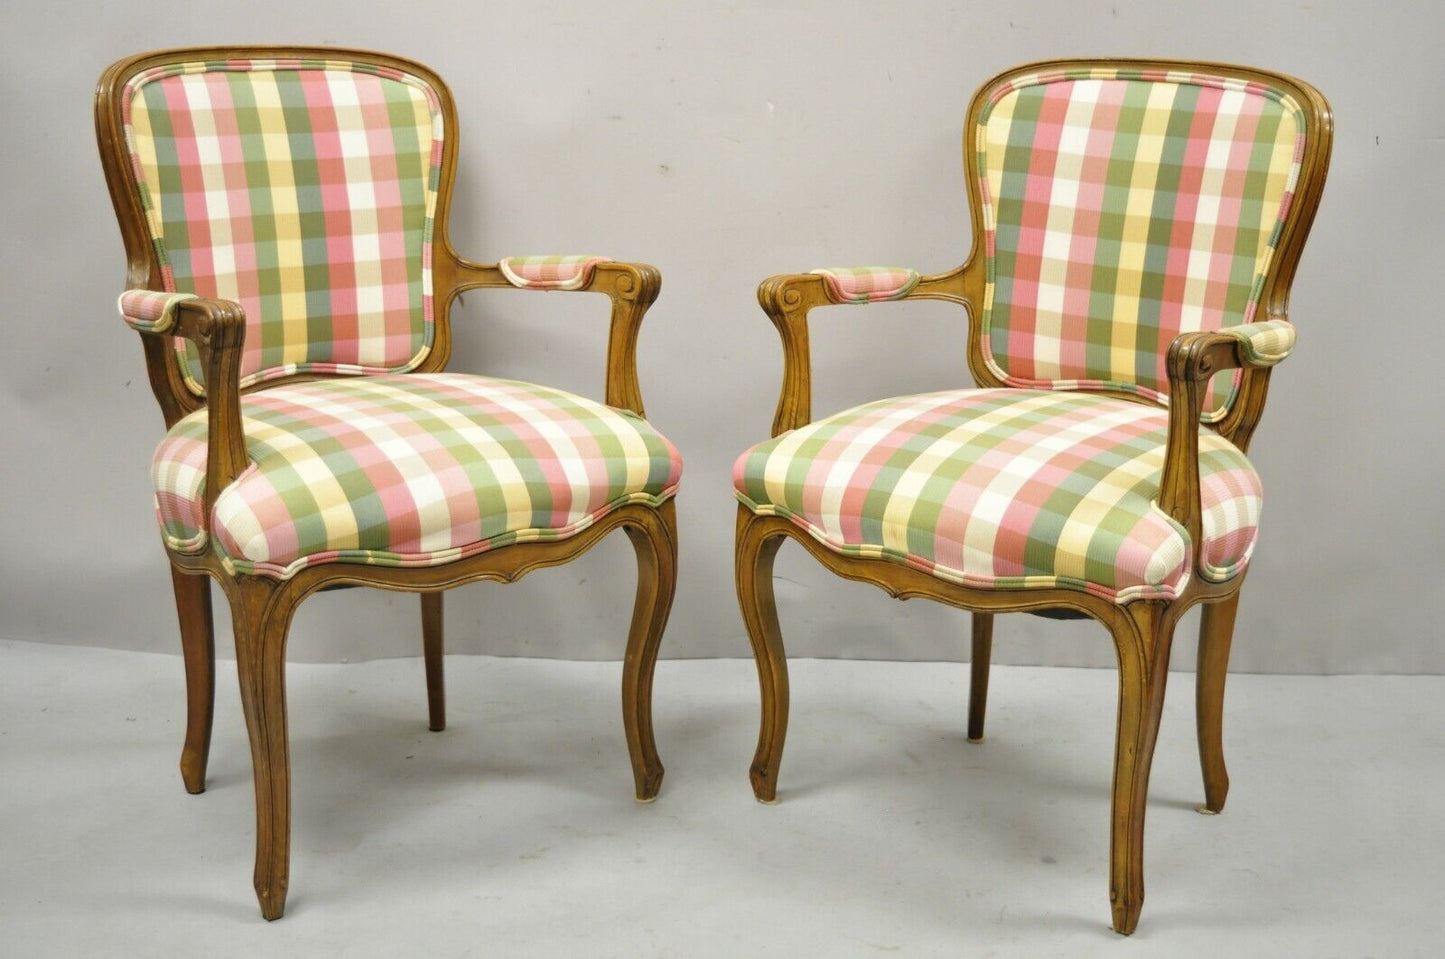 Vintage French Provincial Fauteuil Arm Chairs by Simon Loscertales Bona - a Pair